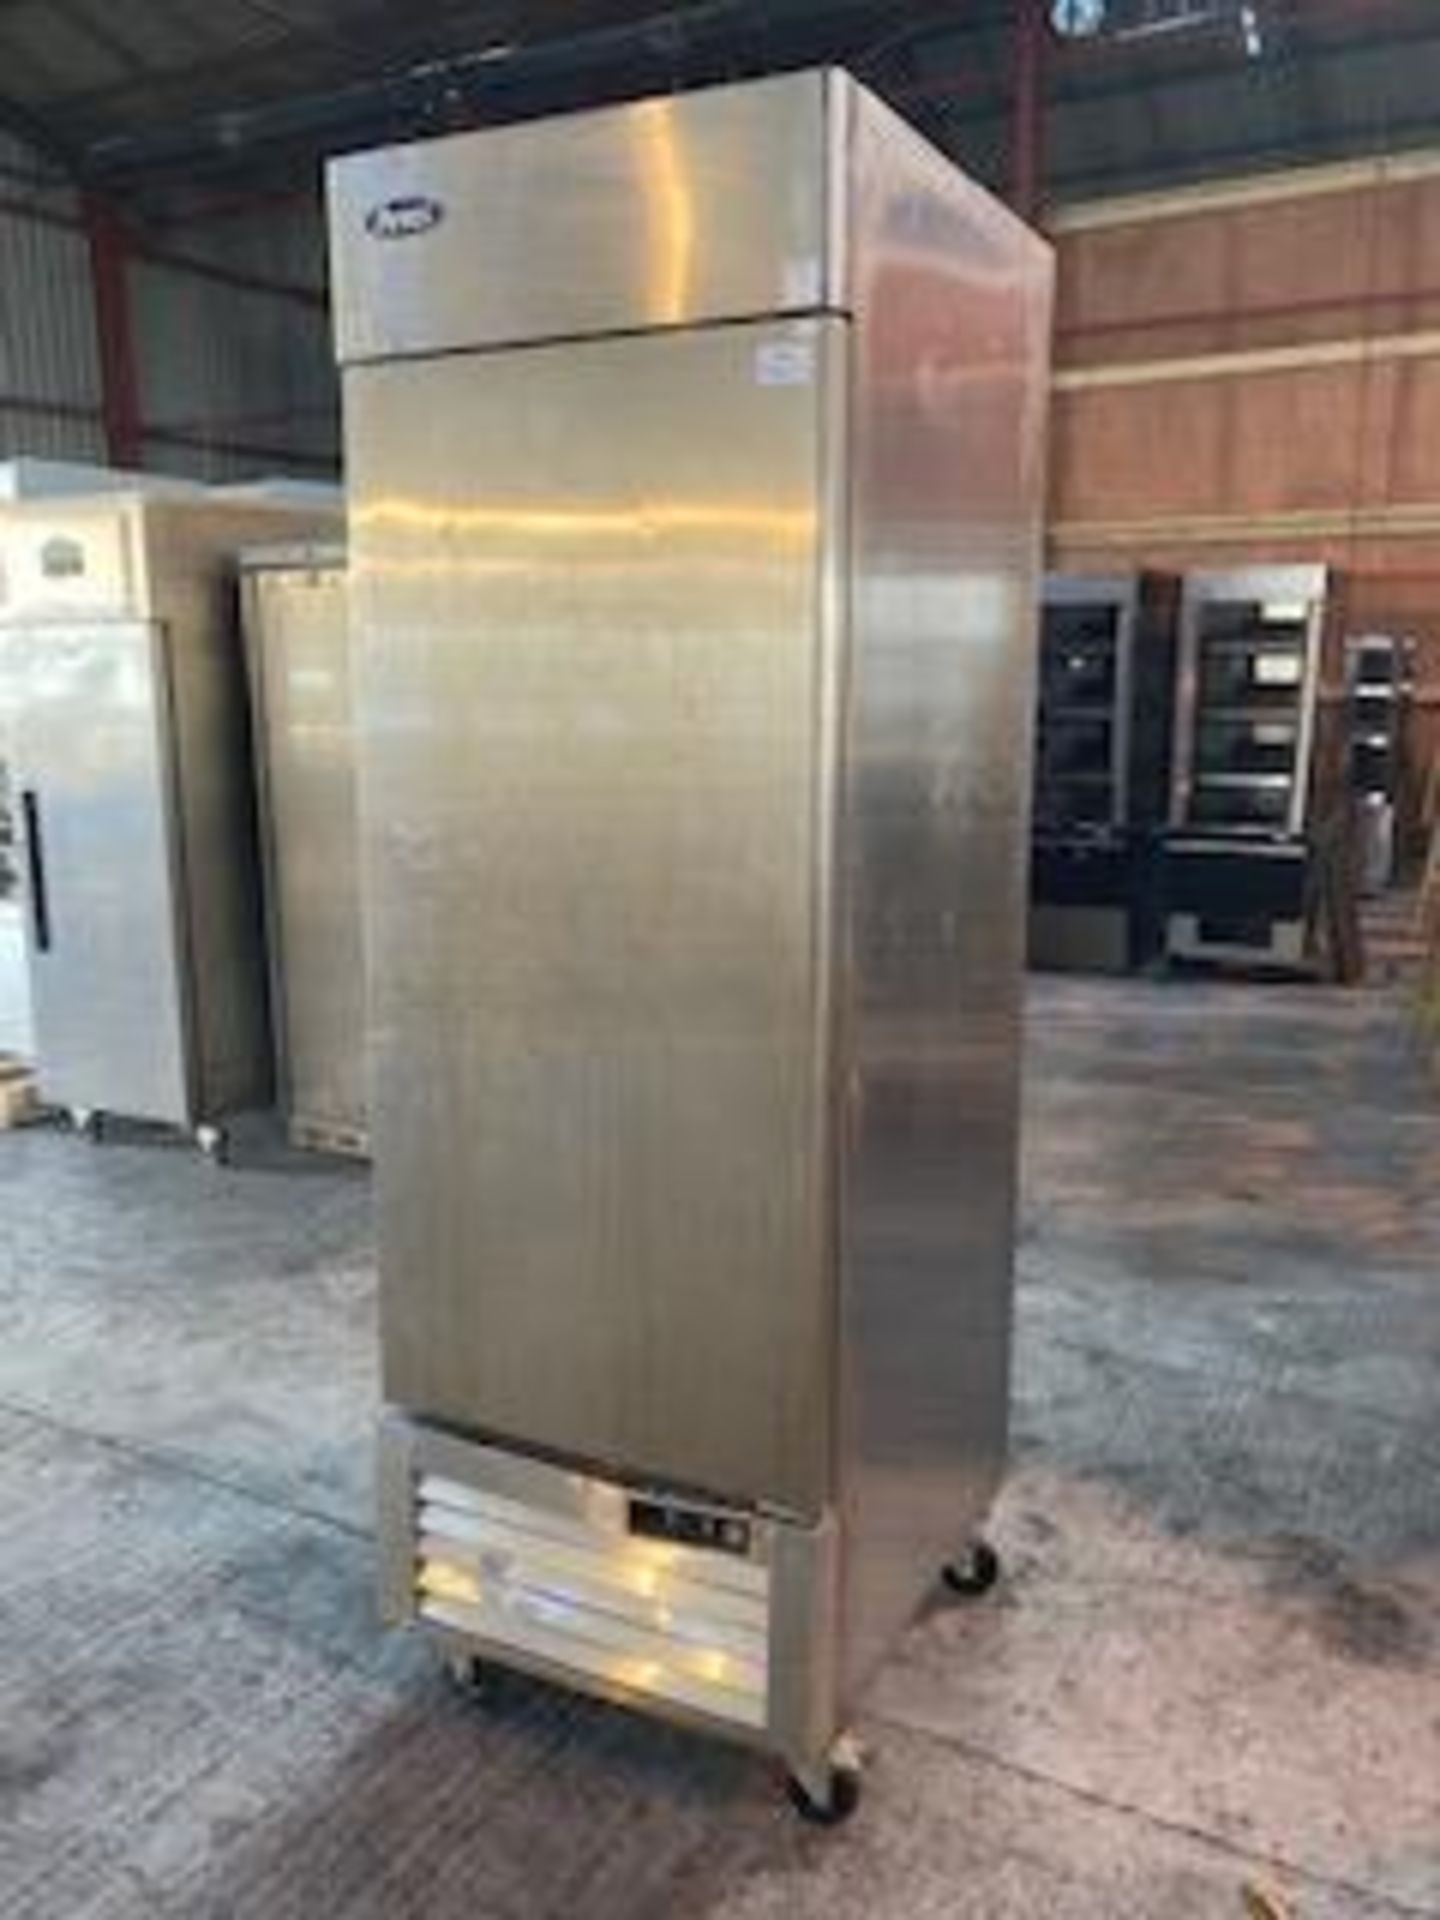 Atosa MBL8951 Single Door Upright Stainless Steel 610 Ltr Freezer - Image 2 of 6